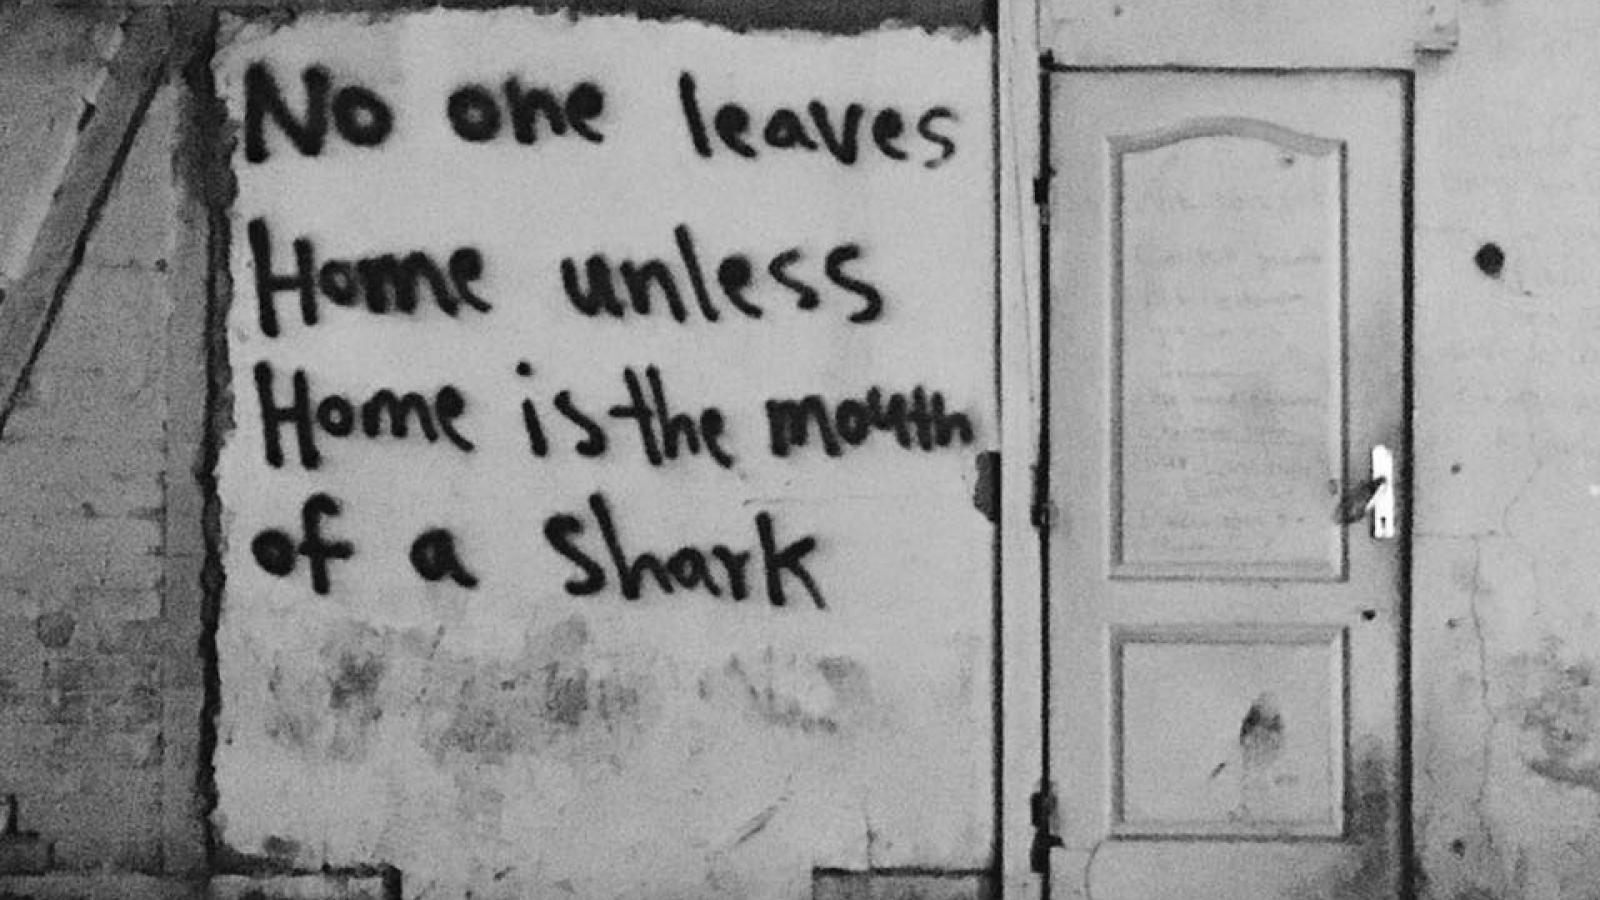 No One Leaves Home Unless Home is the Mouth of a Shark graffiti on a building 